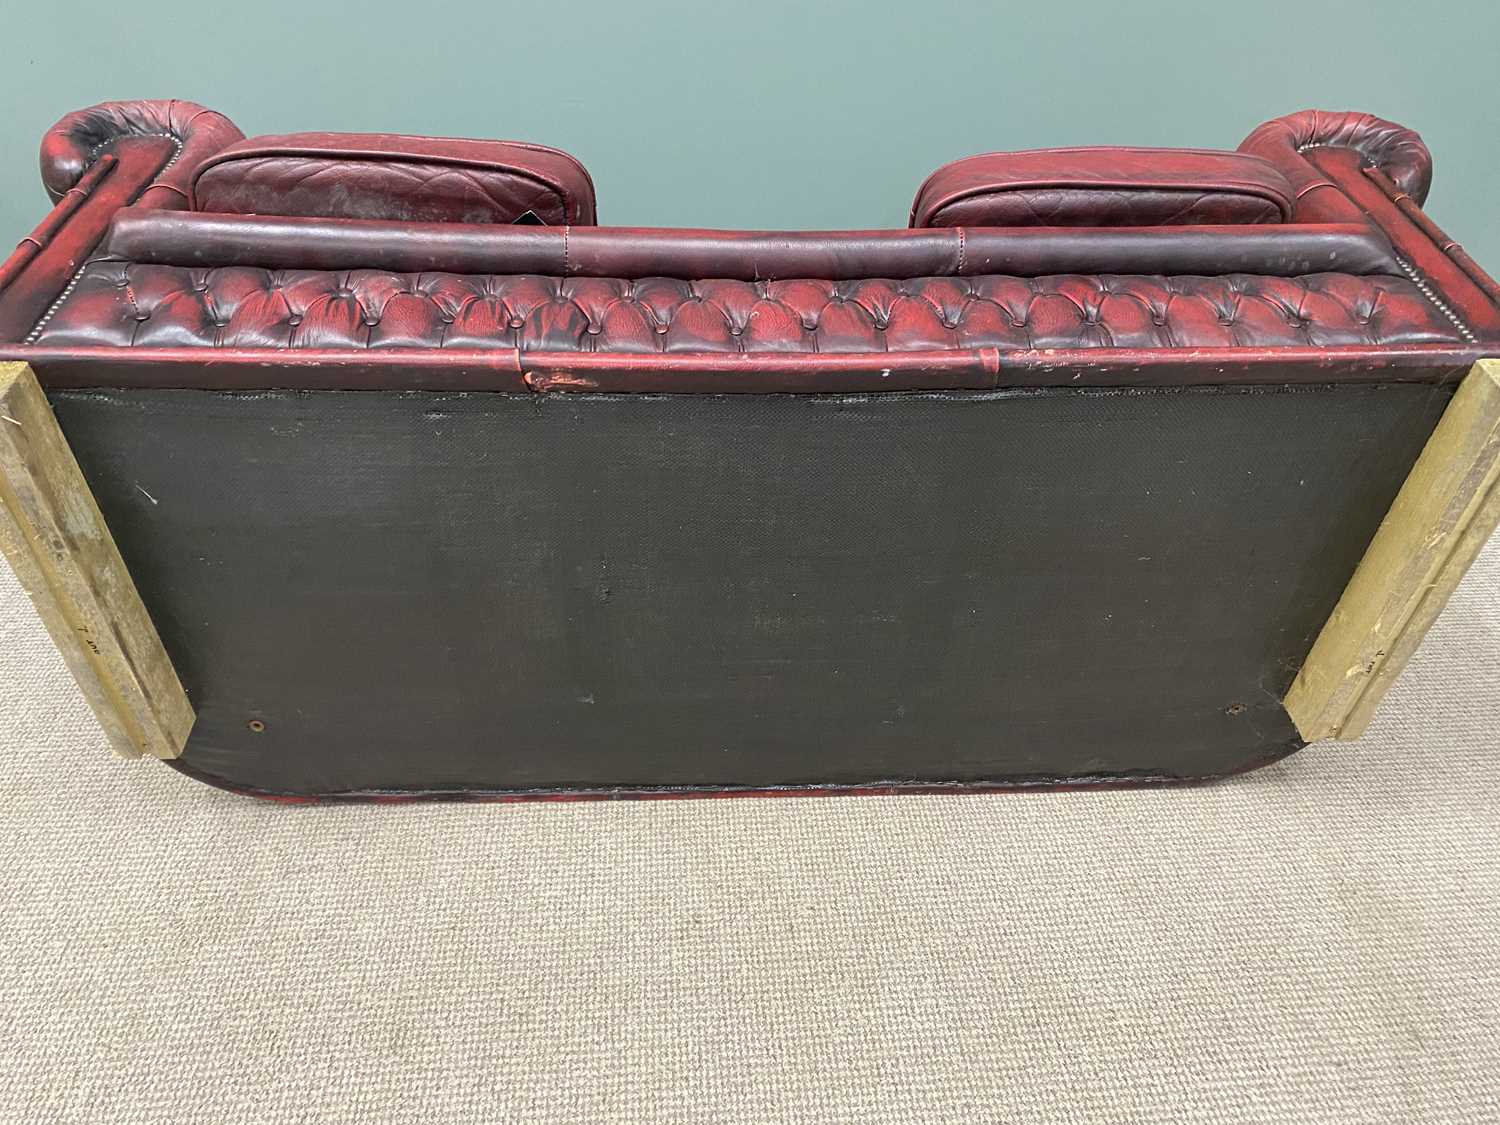 RED LEATHER THREE SEATER CHESTERFIELD TYPE SOFA 68 (h) x 188 (w) x 58cms (d) Provenance: private - Image 4 of 6